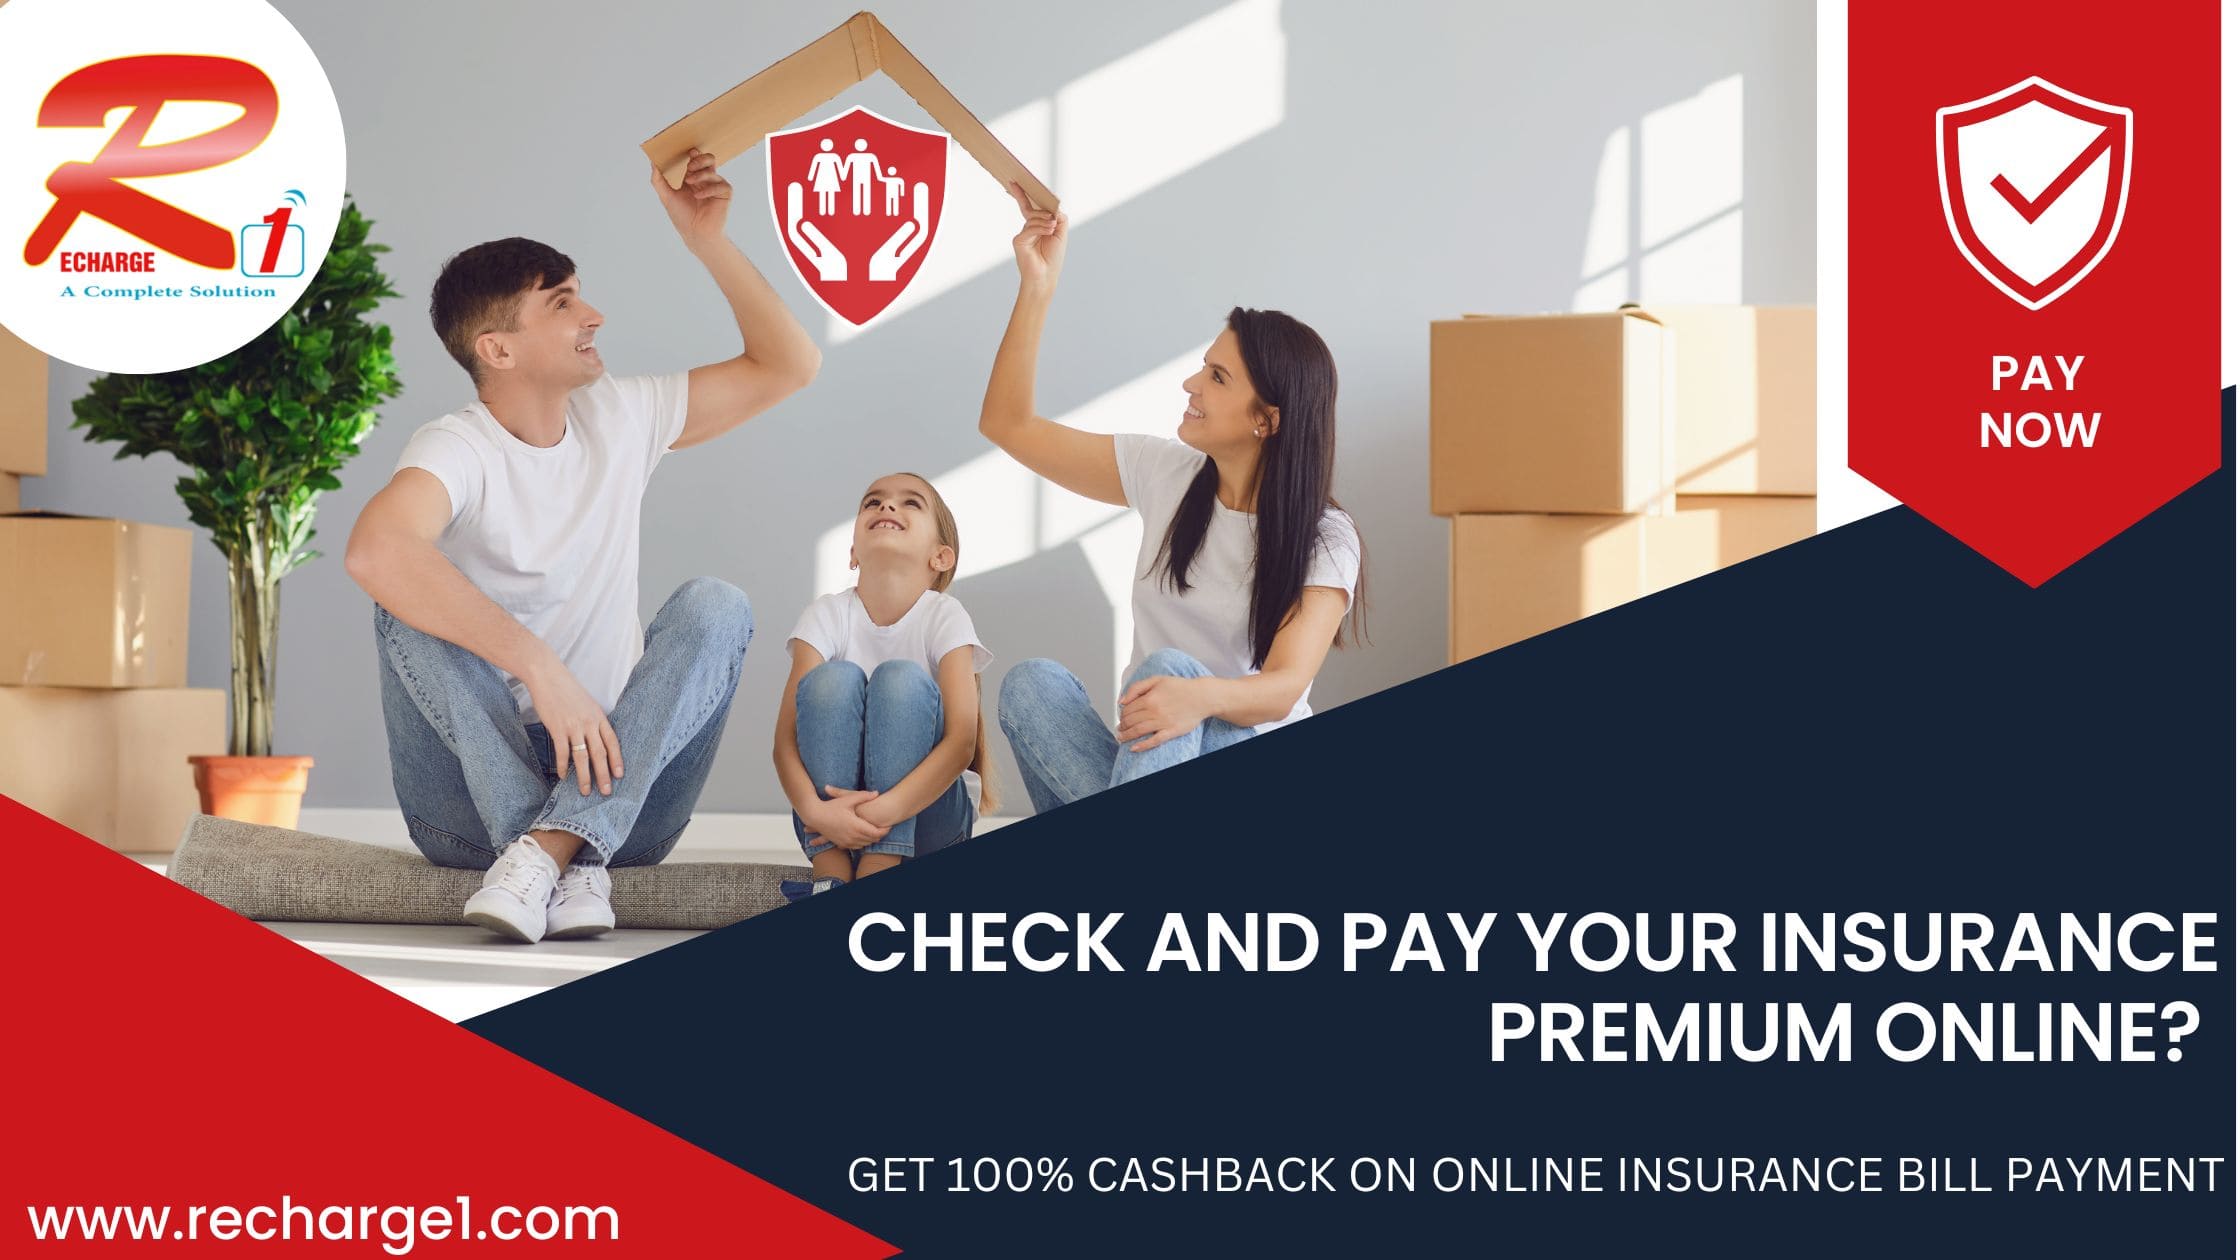  Check and Pay Your Insurance Premium Online?